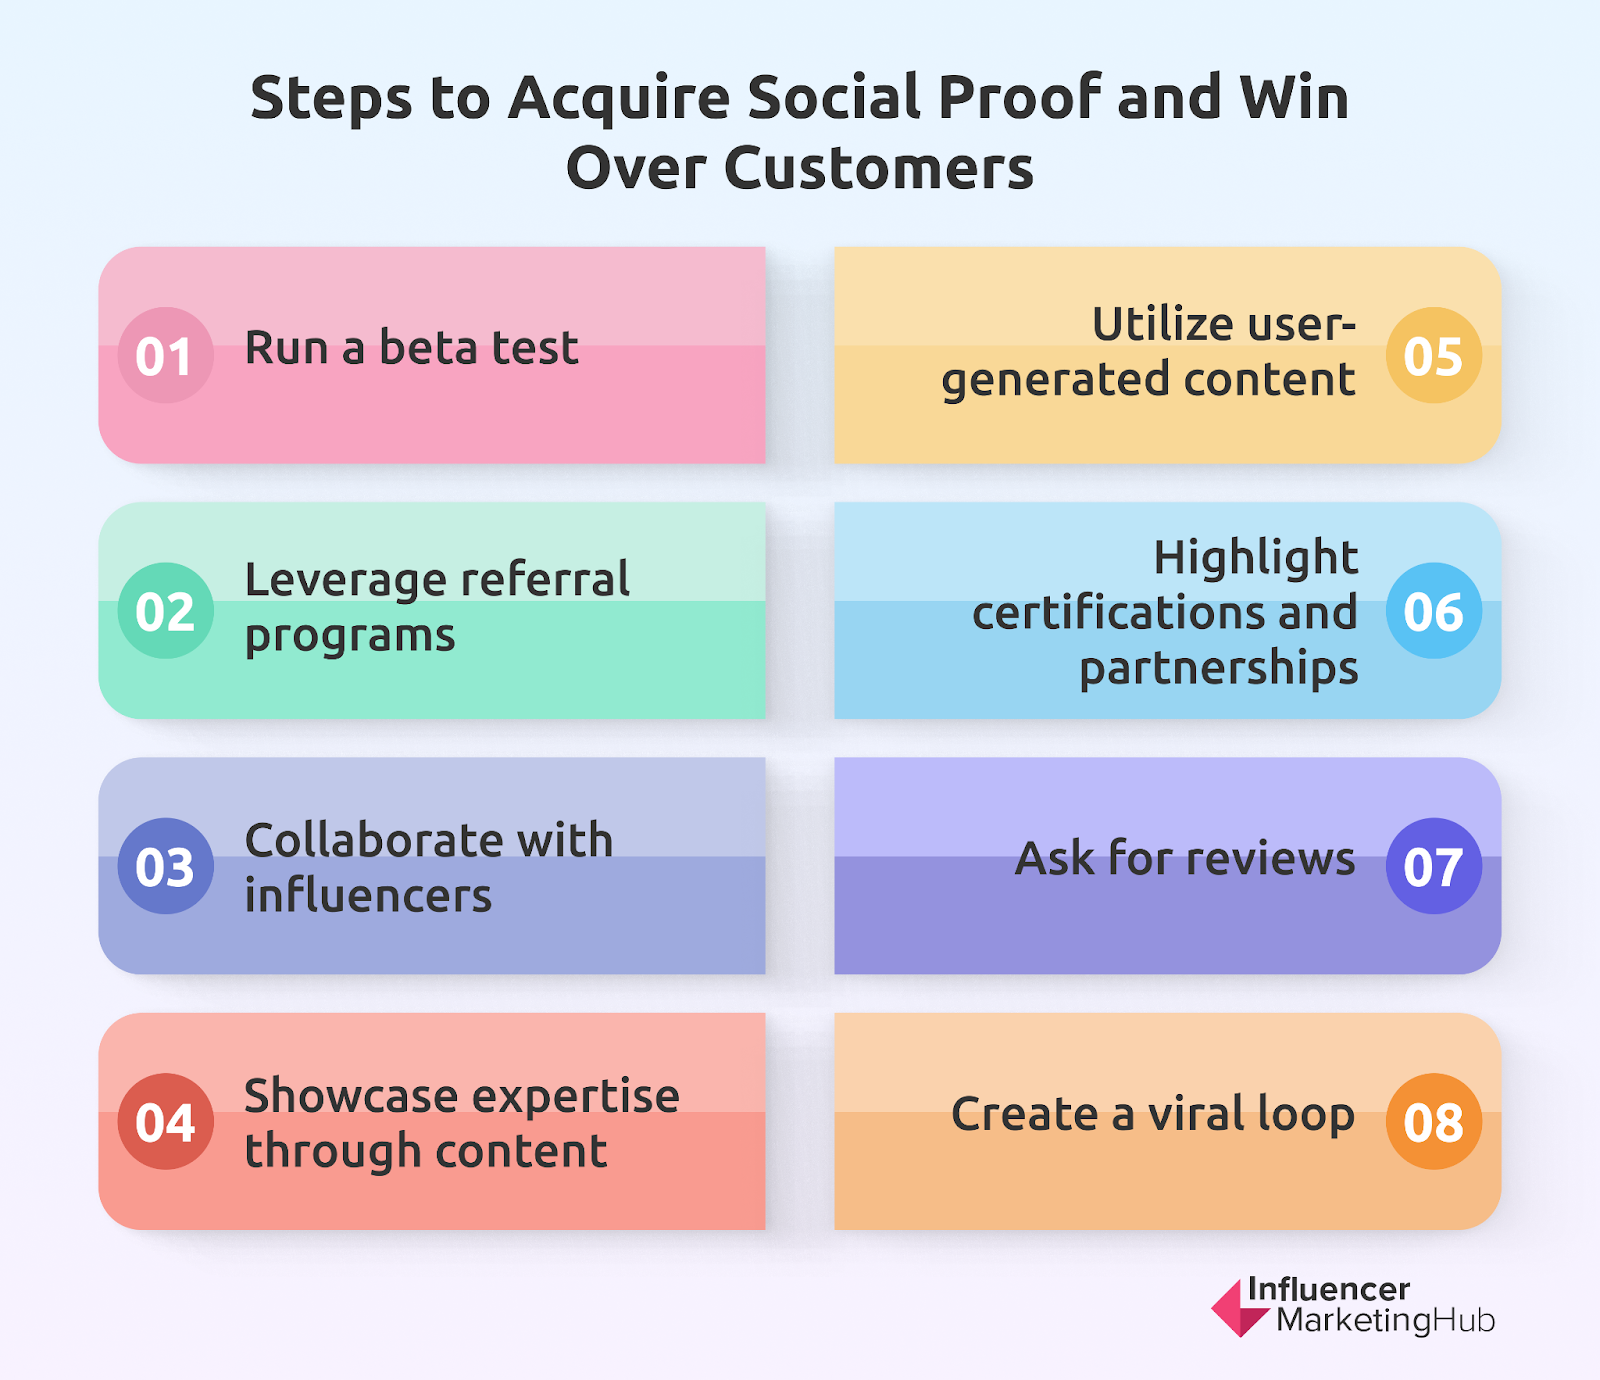 Building and Leveraging Social Proof Effectively